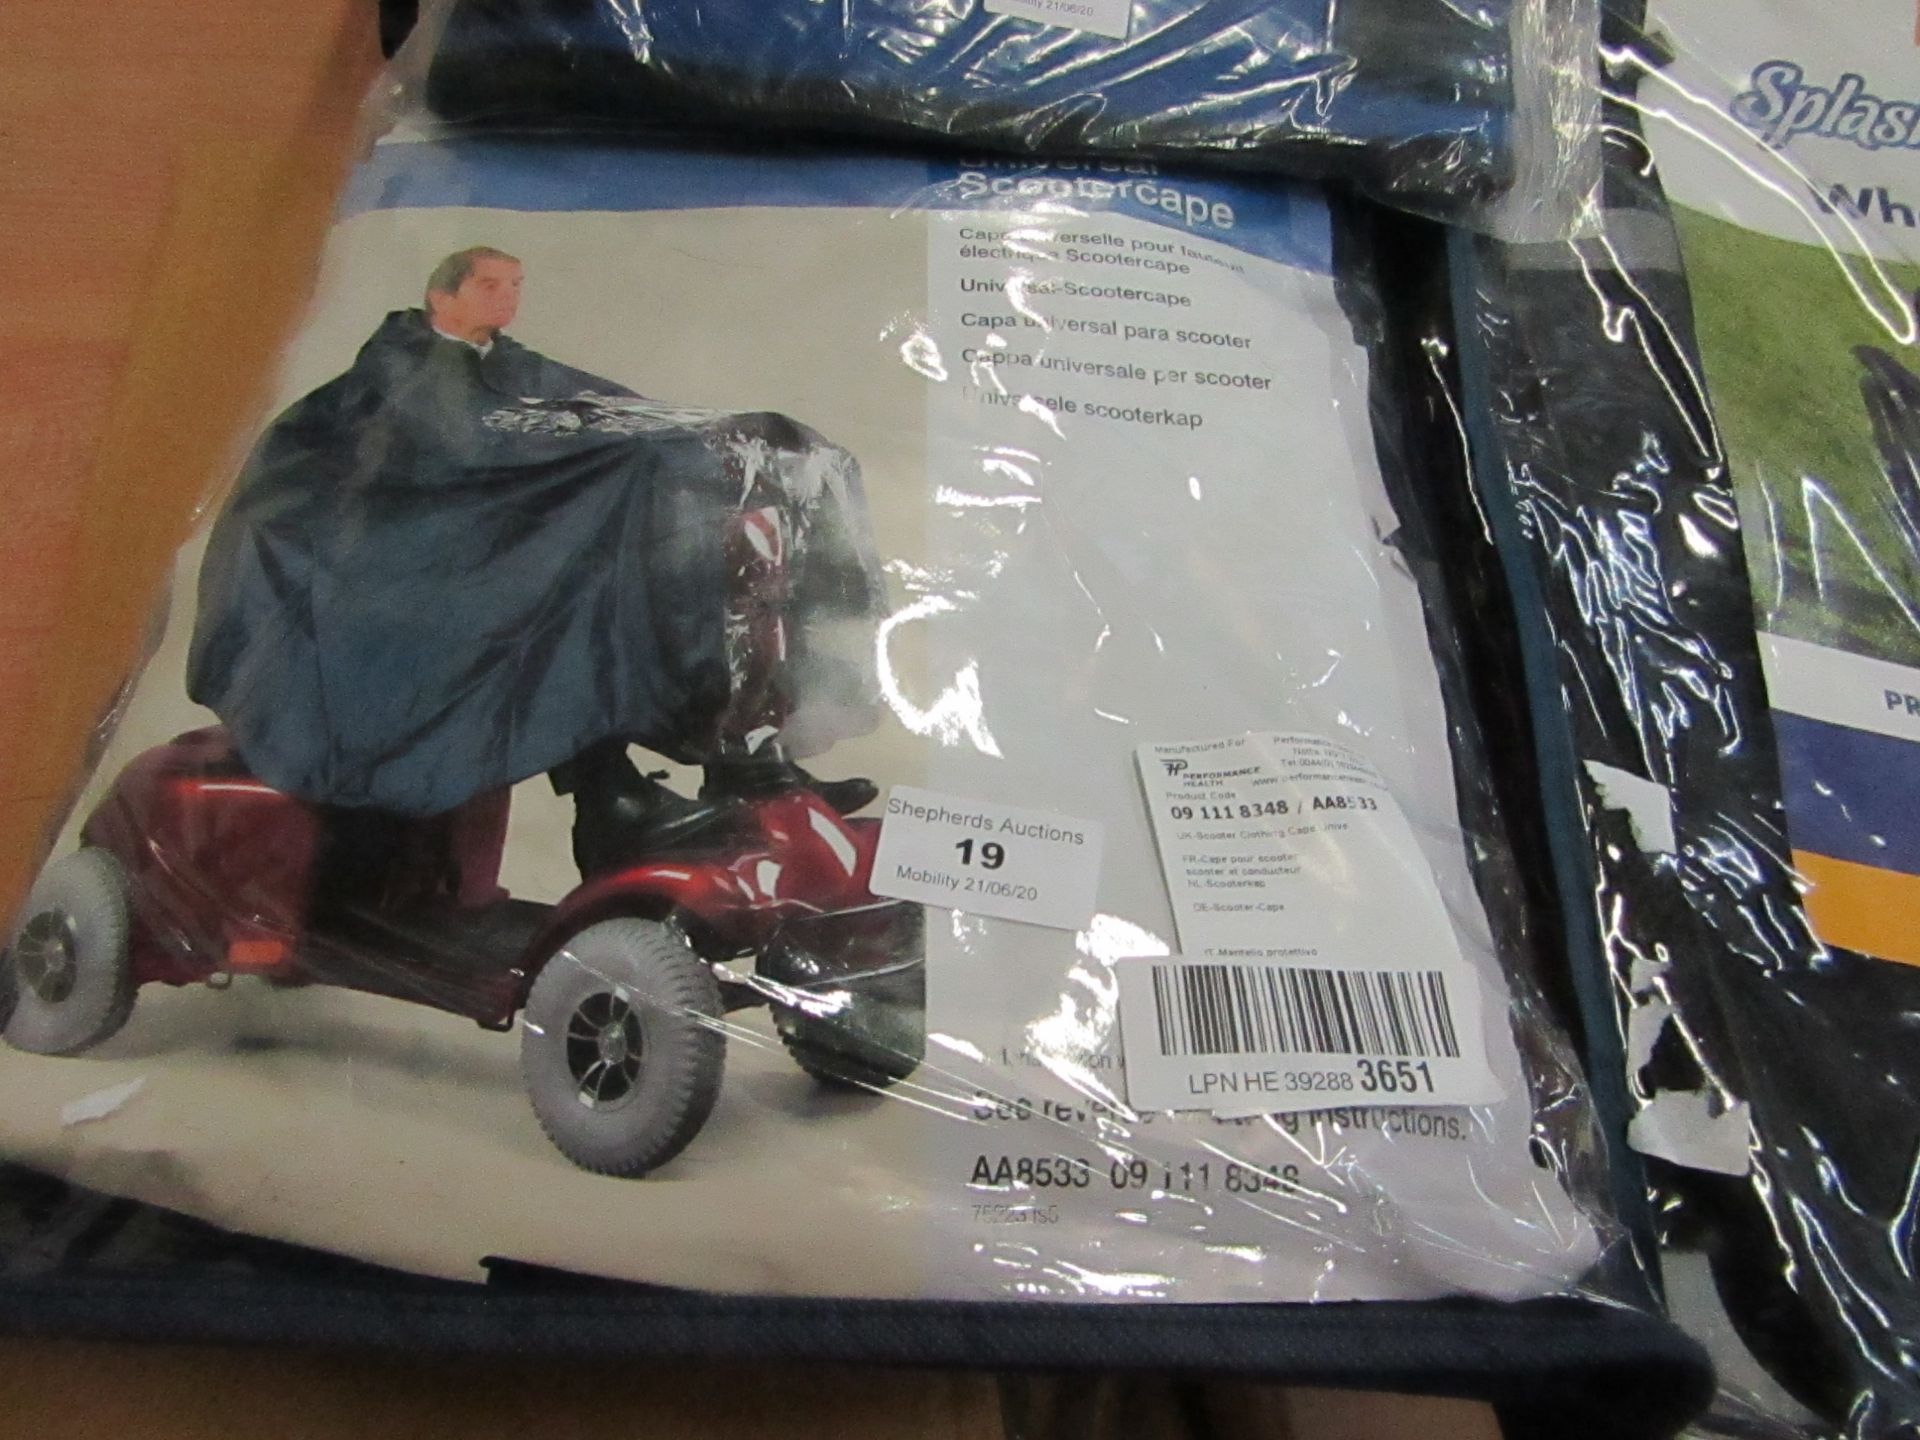 Days Universal Scooter Cape, in packaging